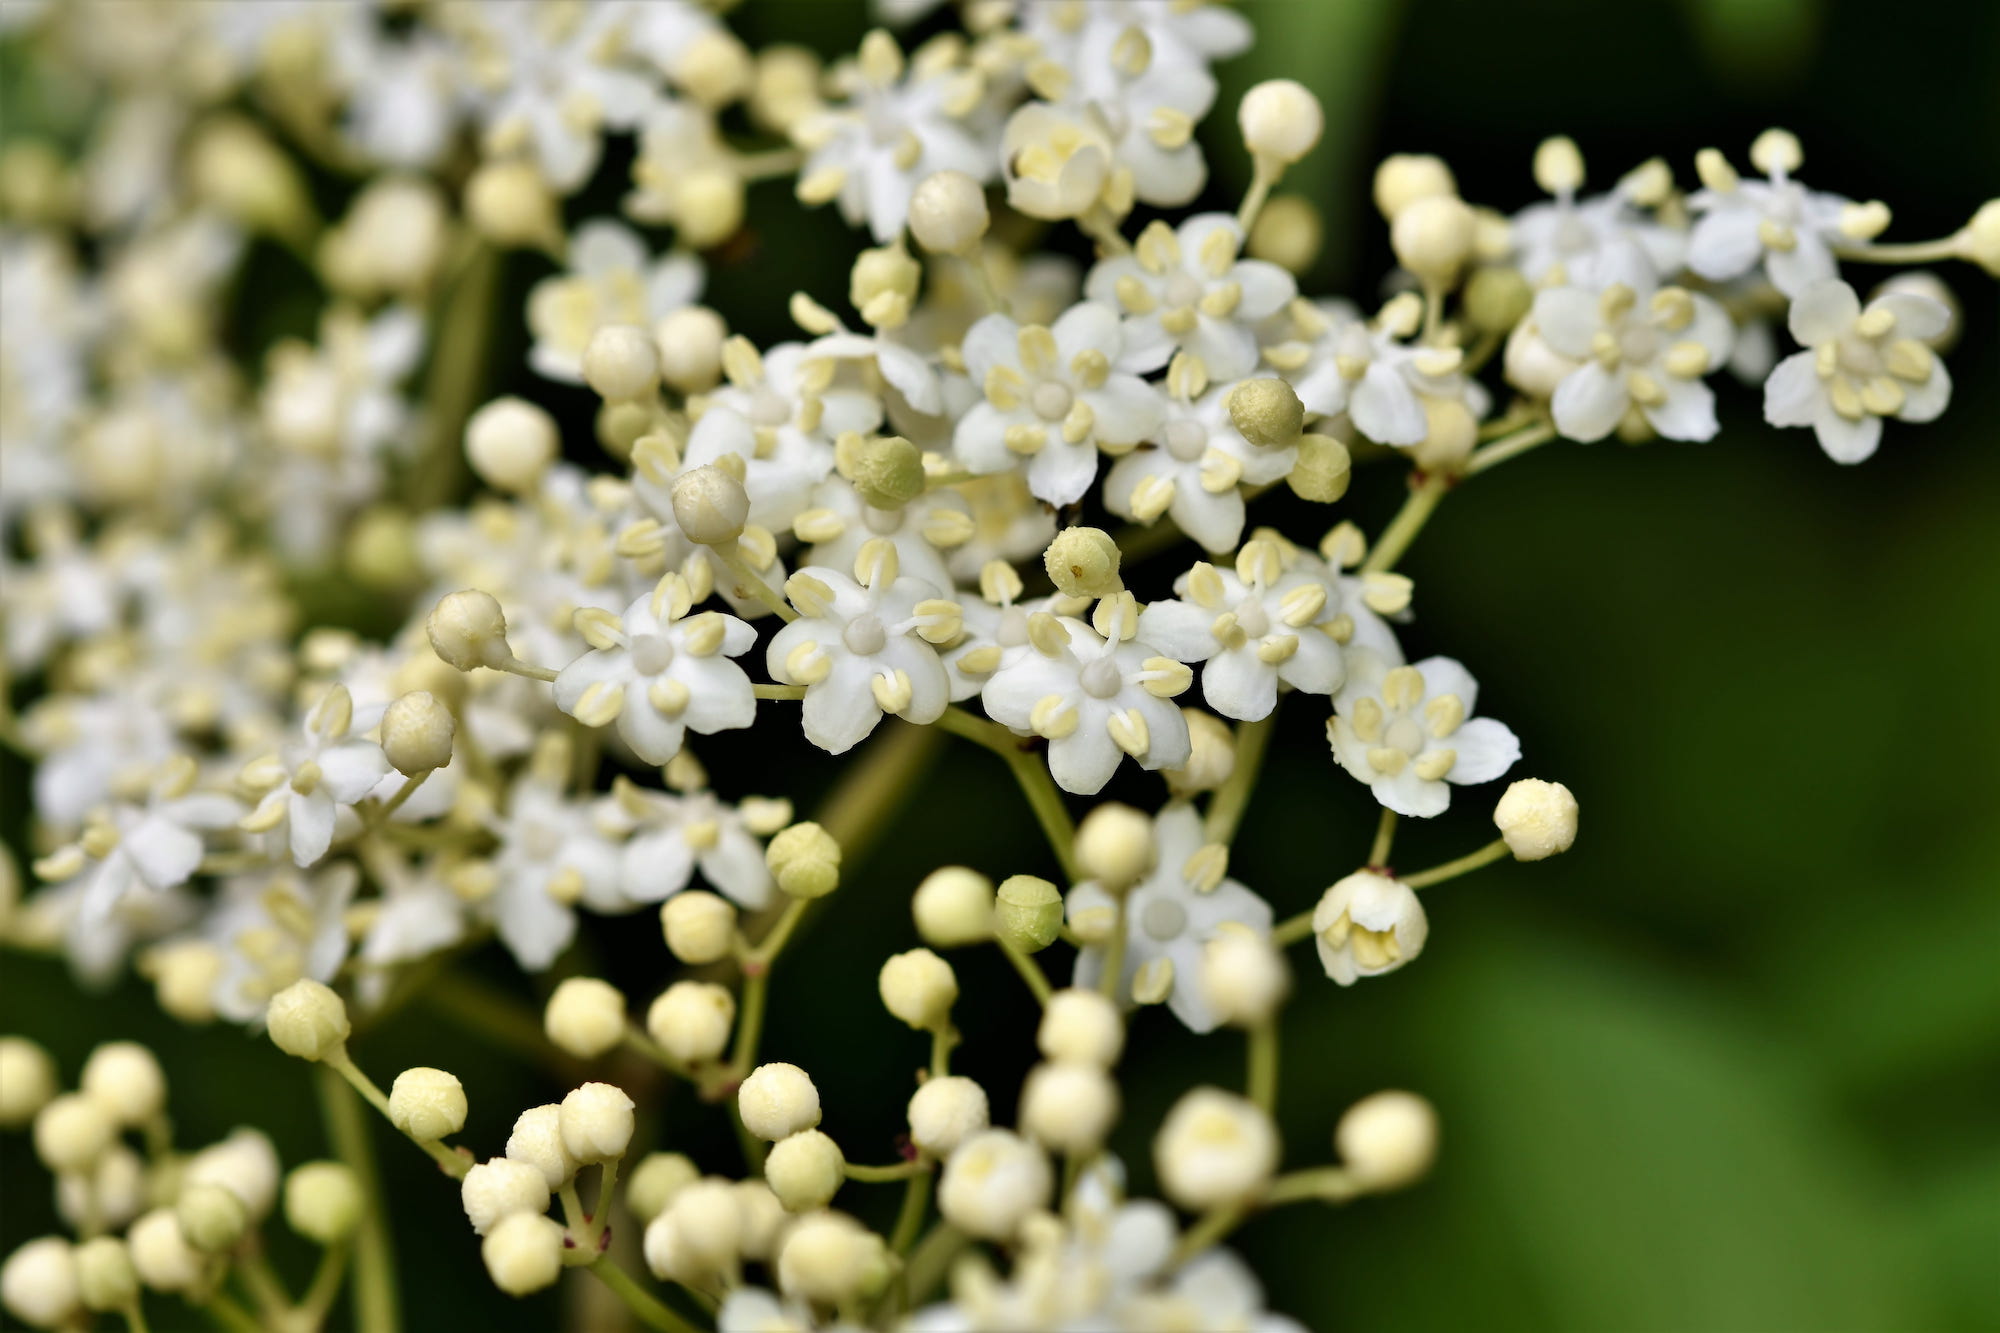 Elderberry plants that Missouri farmers can use in their own operations